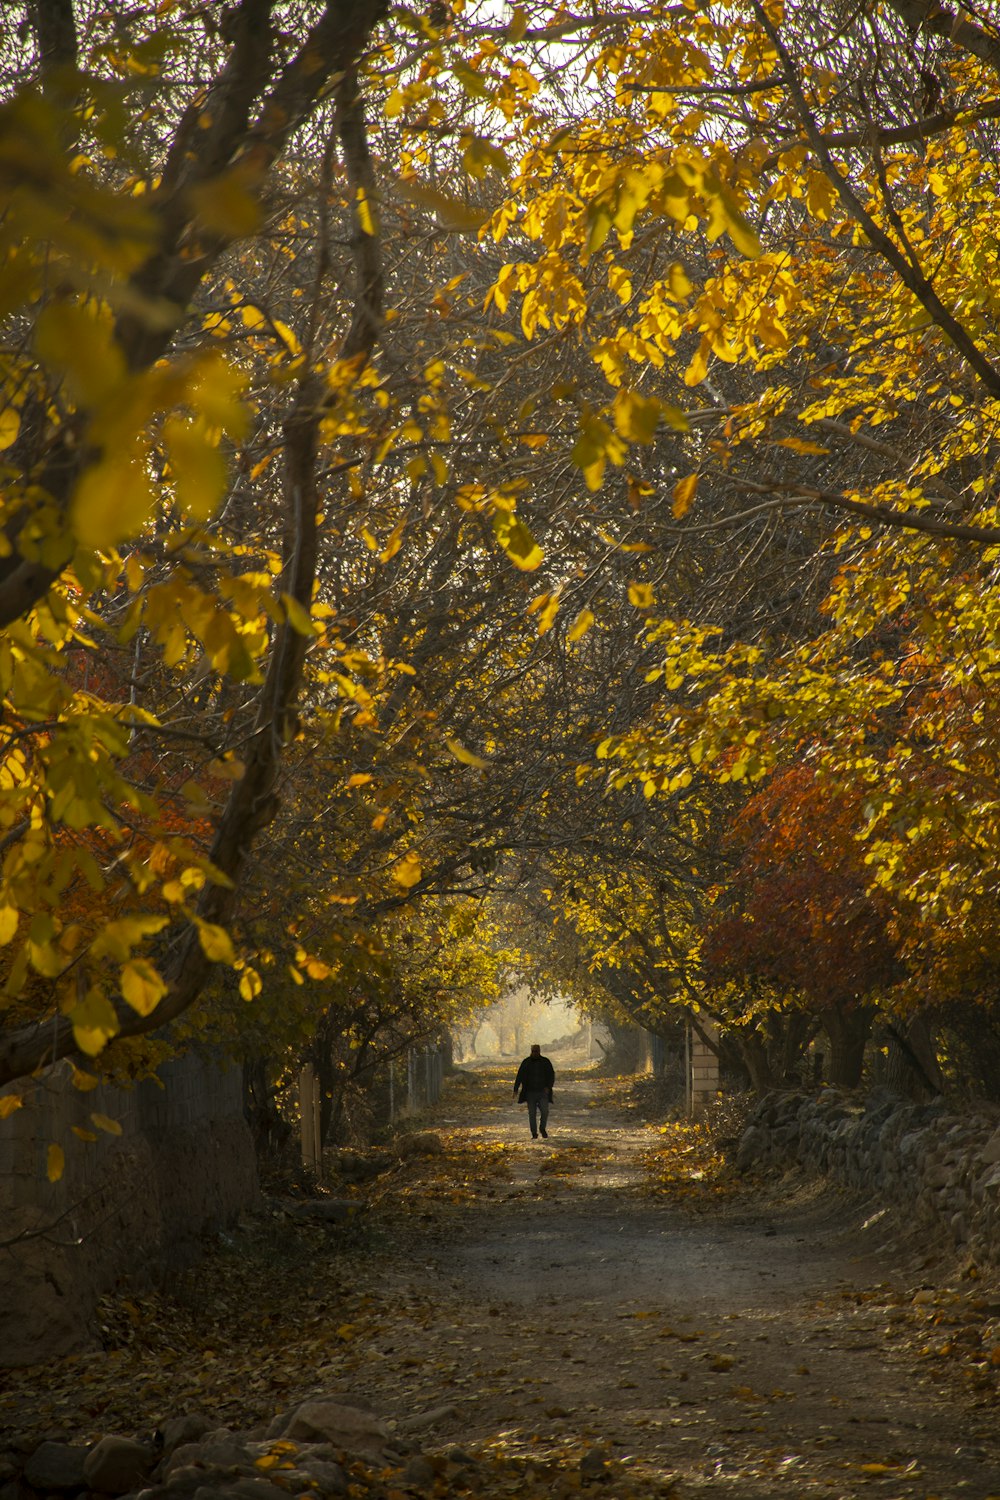 a person walking on a path with yellow leaves on the trees